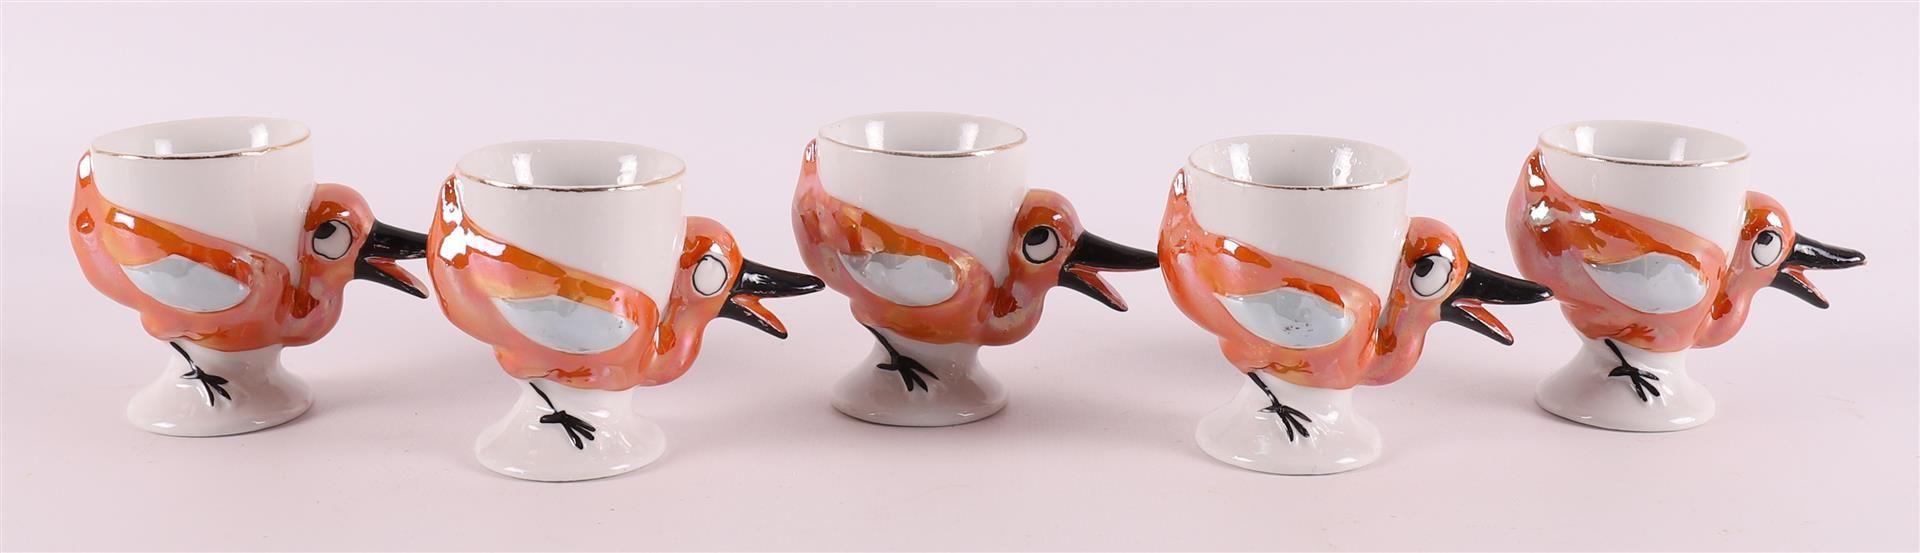 A series of five vintage porcelain design egg cups, mid-20th century. - Image 2 of 4